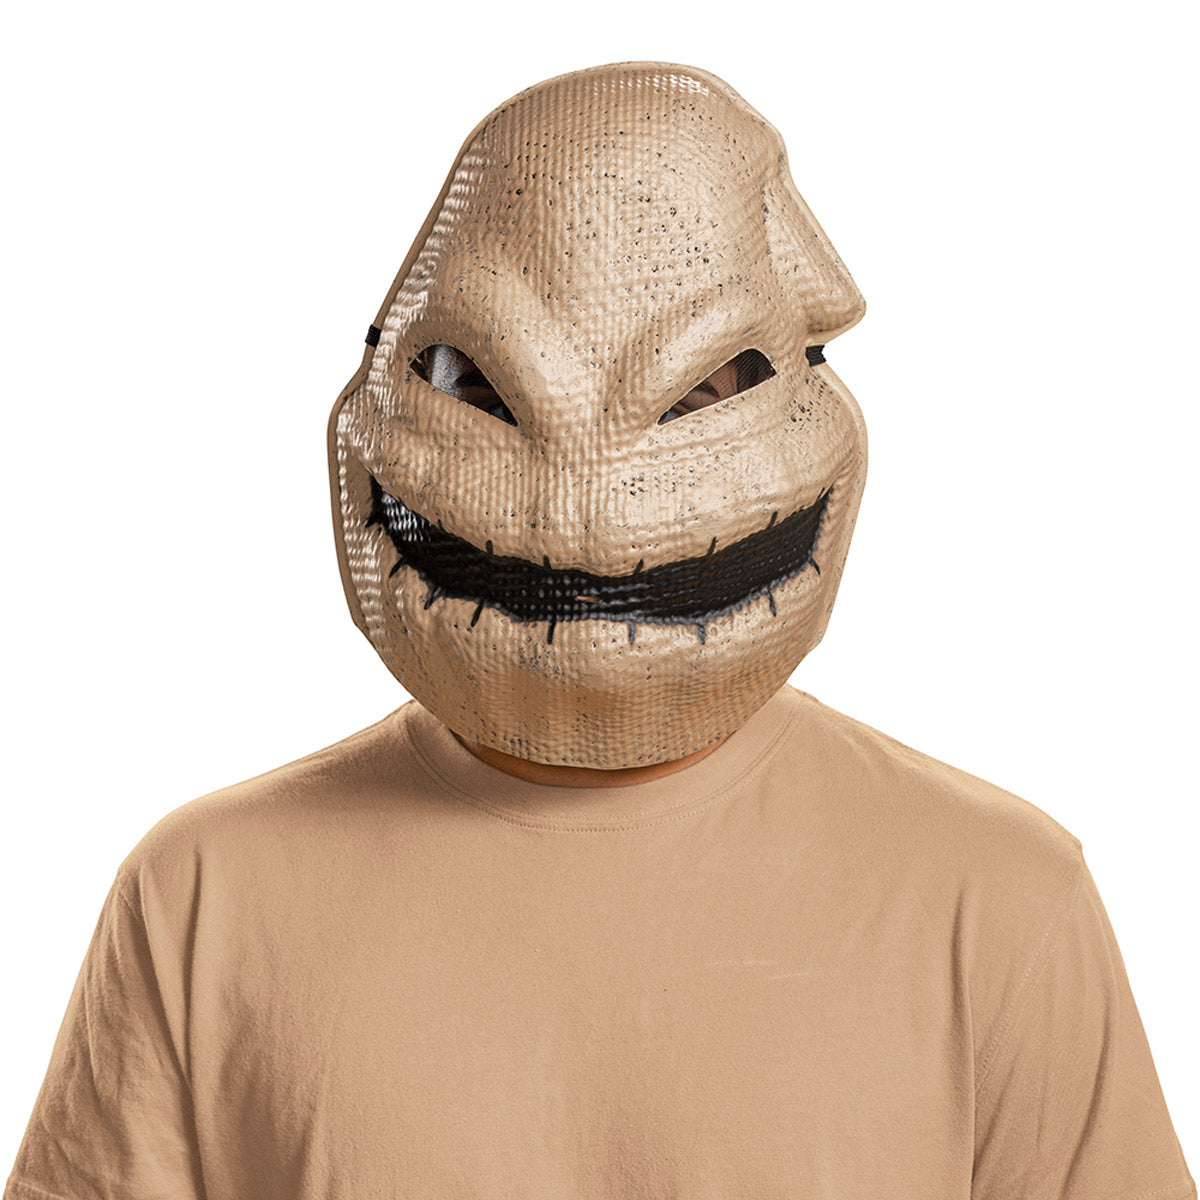 Oogie Boogie Vacuform Mask Disguise 106699